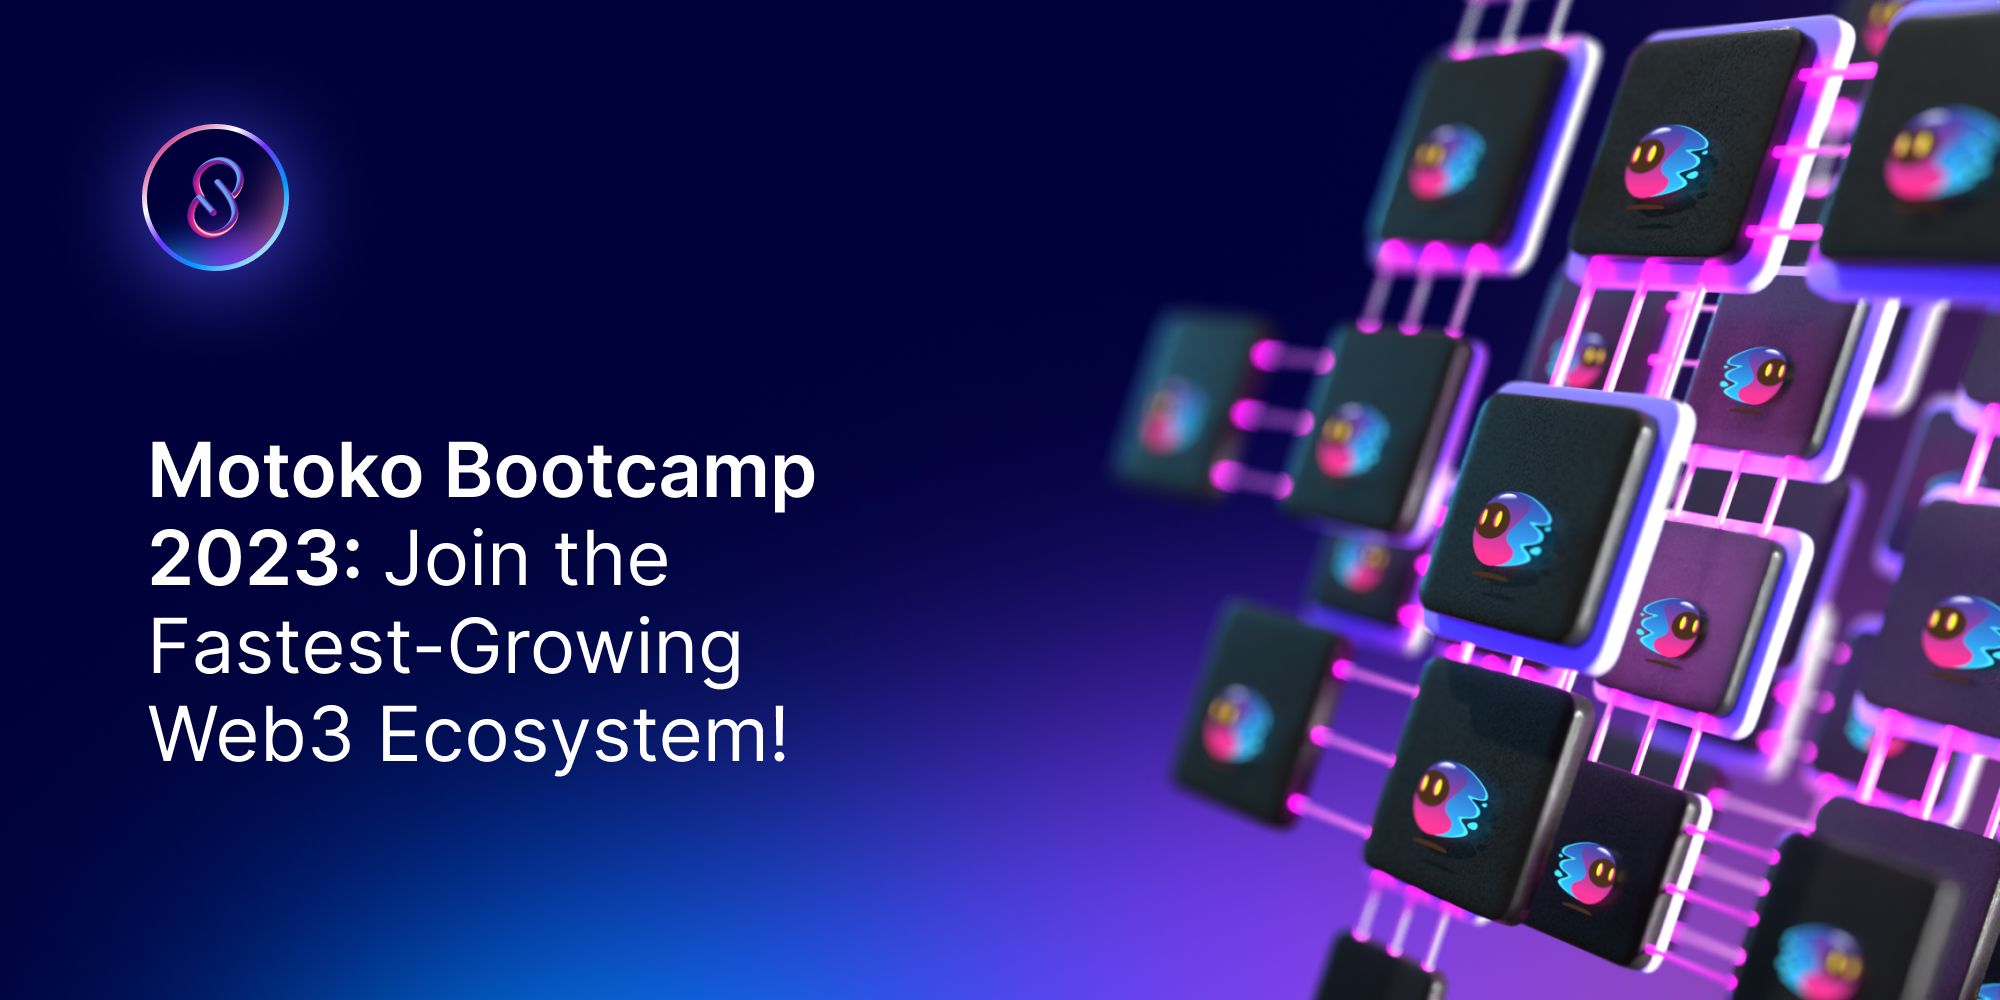 Motoko Bootcamp 2023: Join the Fastest-Growing Web3 Ecosystem!